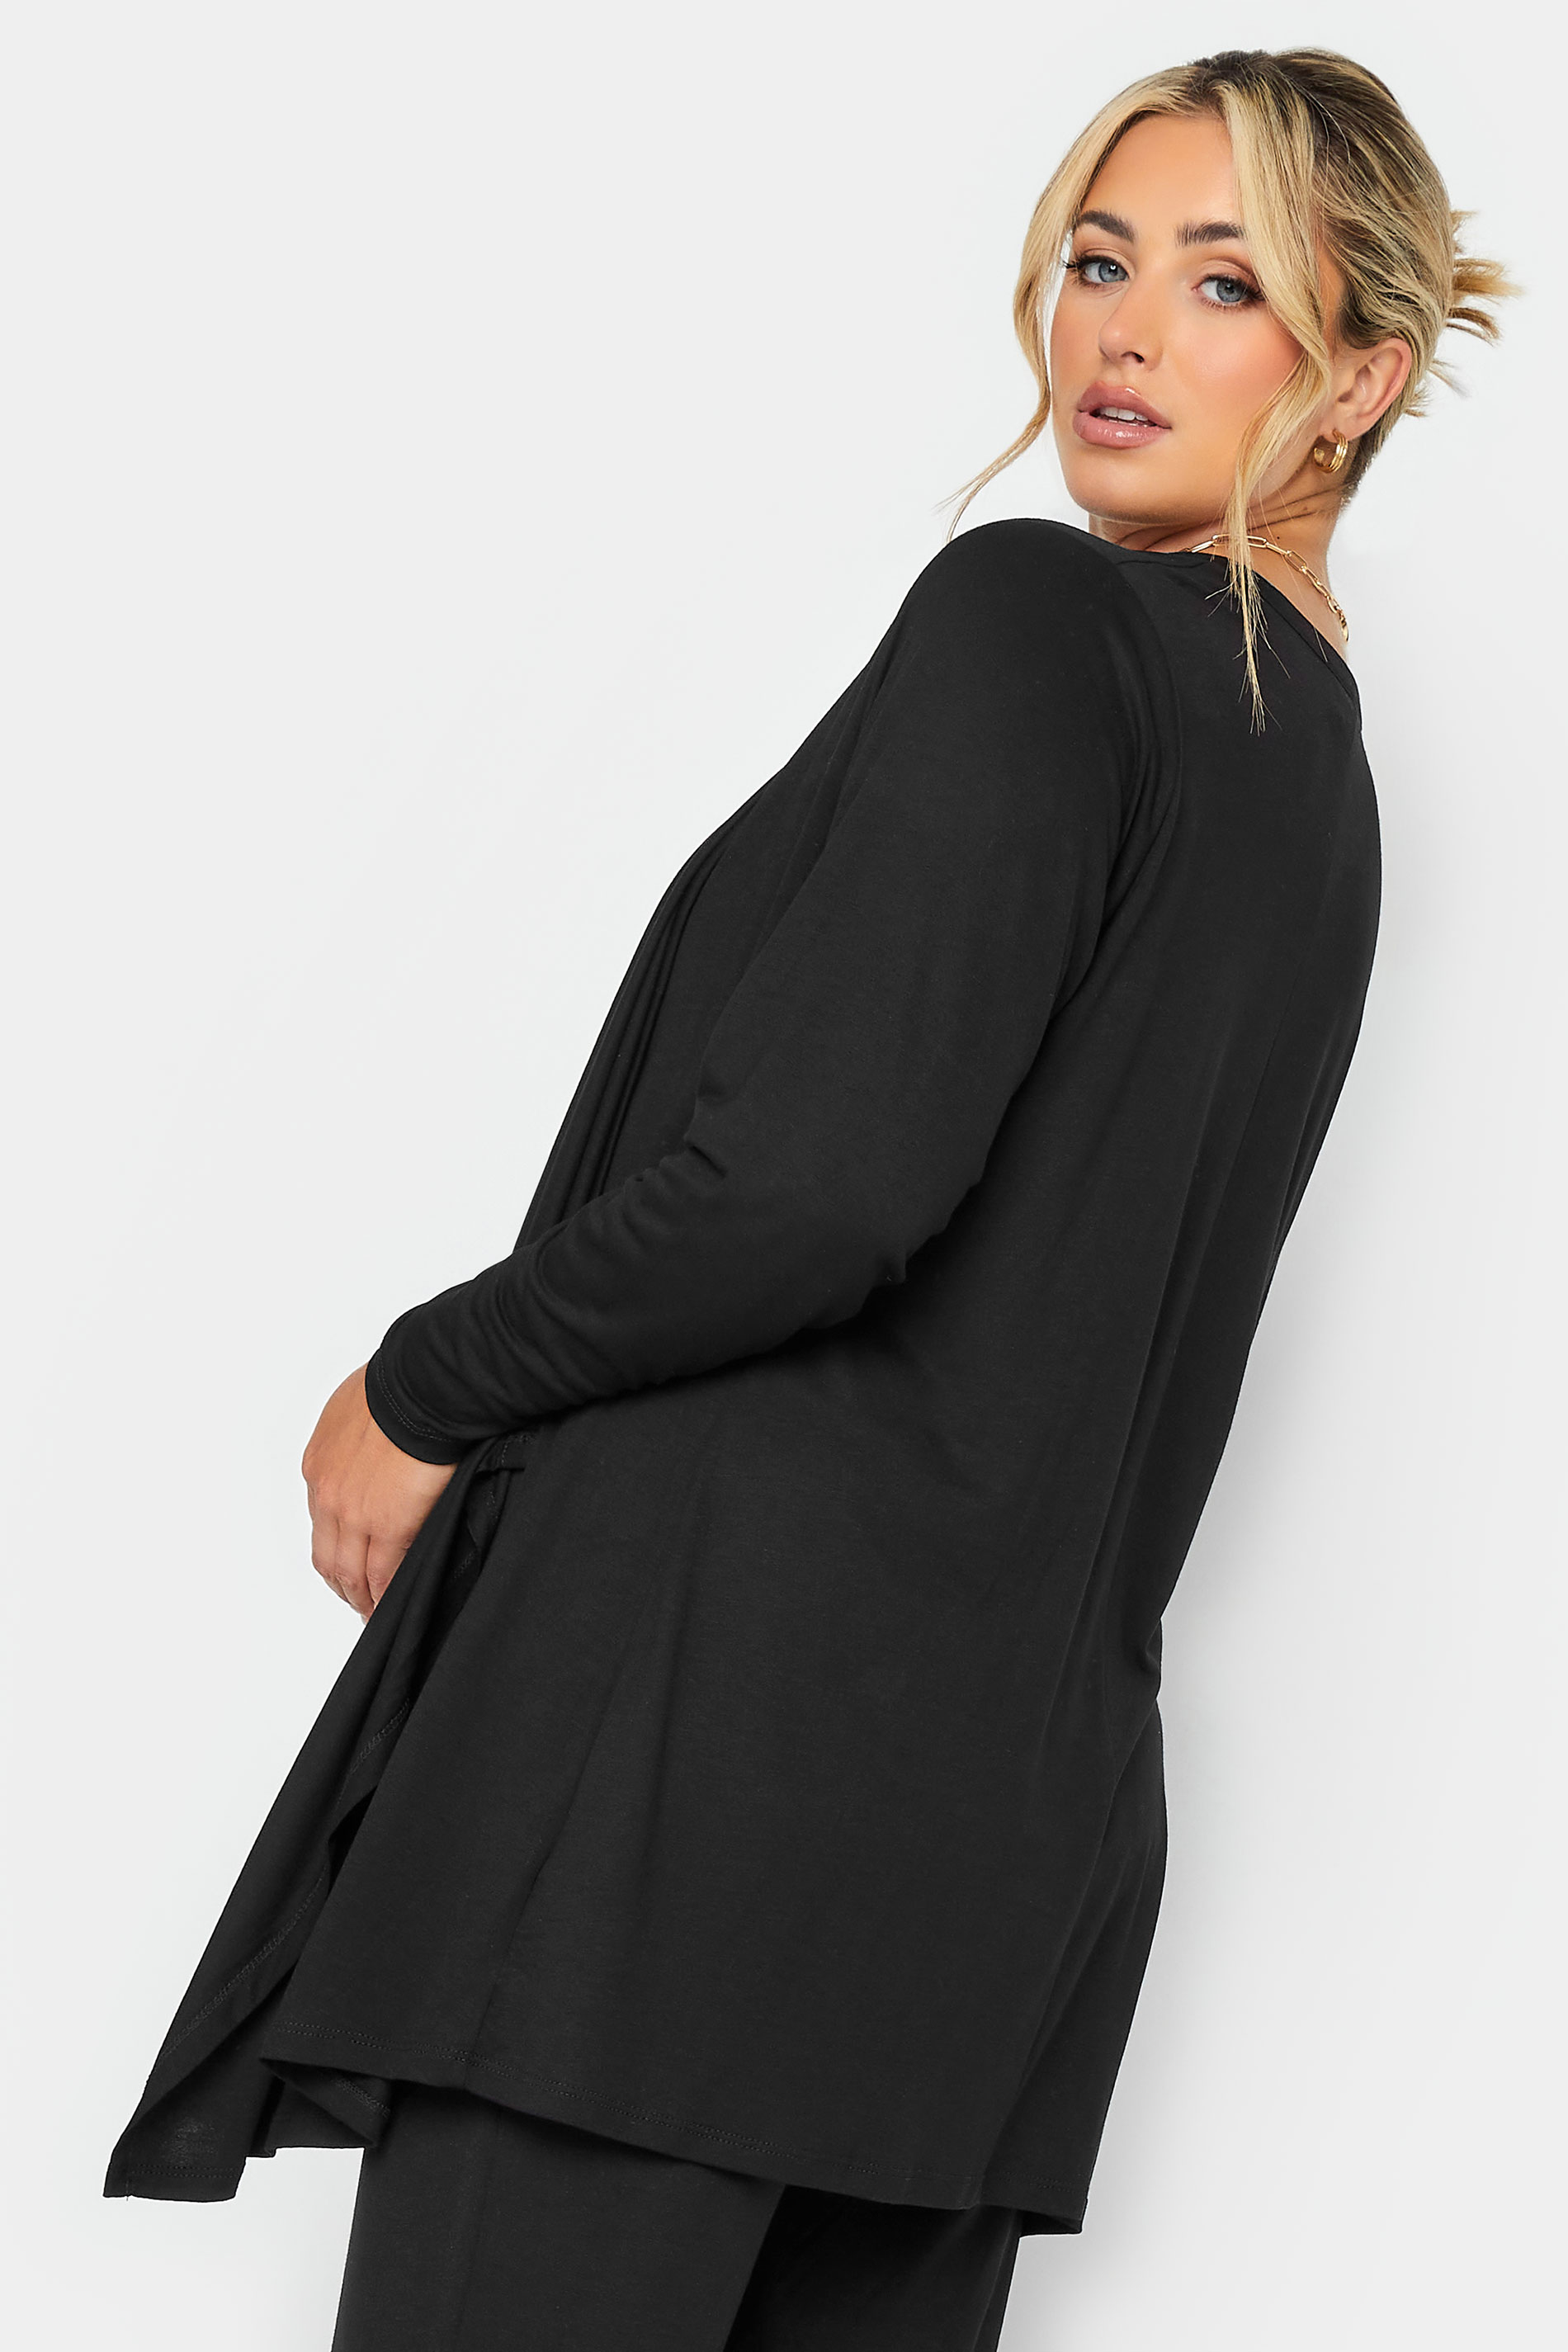 BUMP IT UP MATERNITY Plus Size Curve Black Waterfall Cardigan | Yours Clothing  3